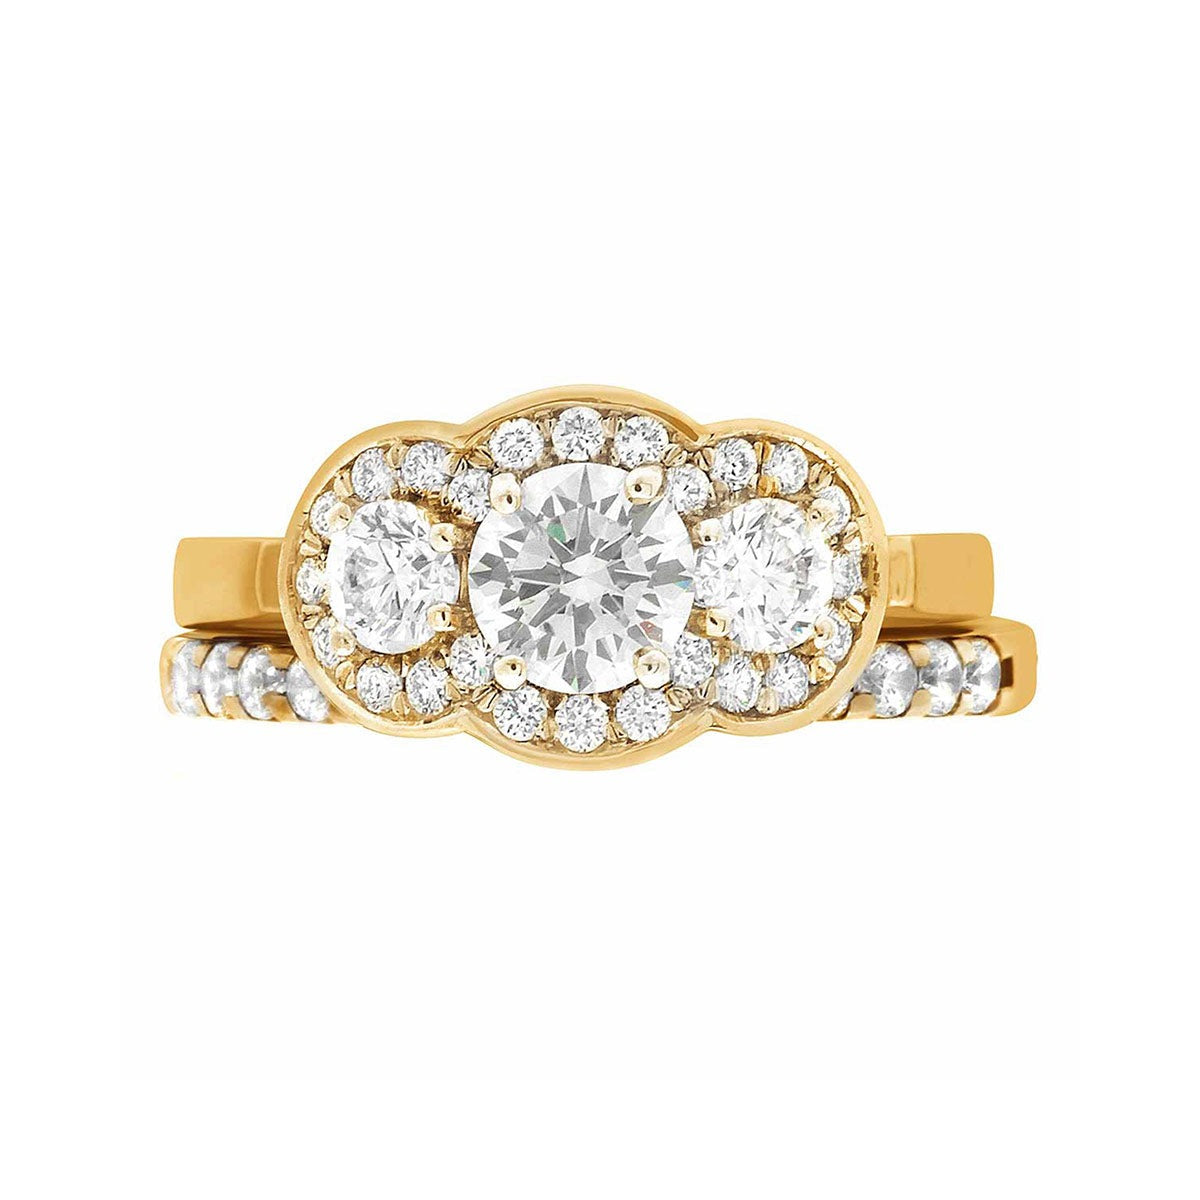 Three Halo Engagement Ring in yellow gold, lying flat with a white background and with a matching diamond set wedding ring